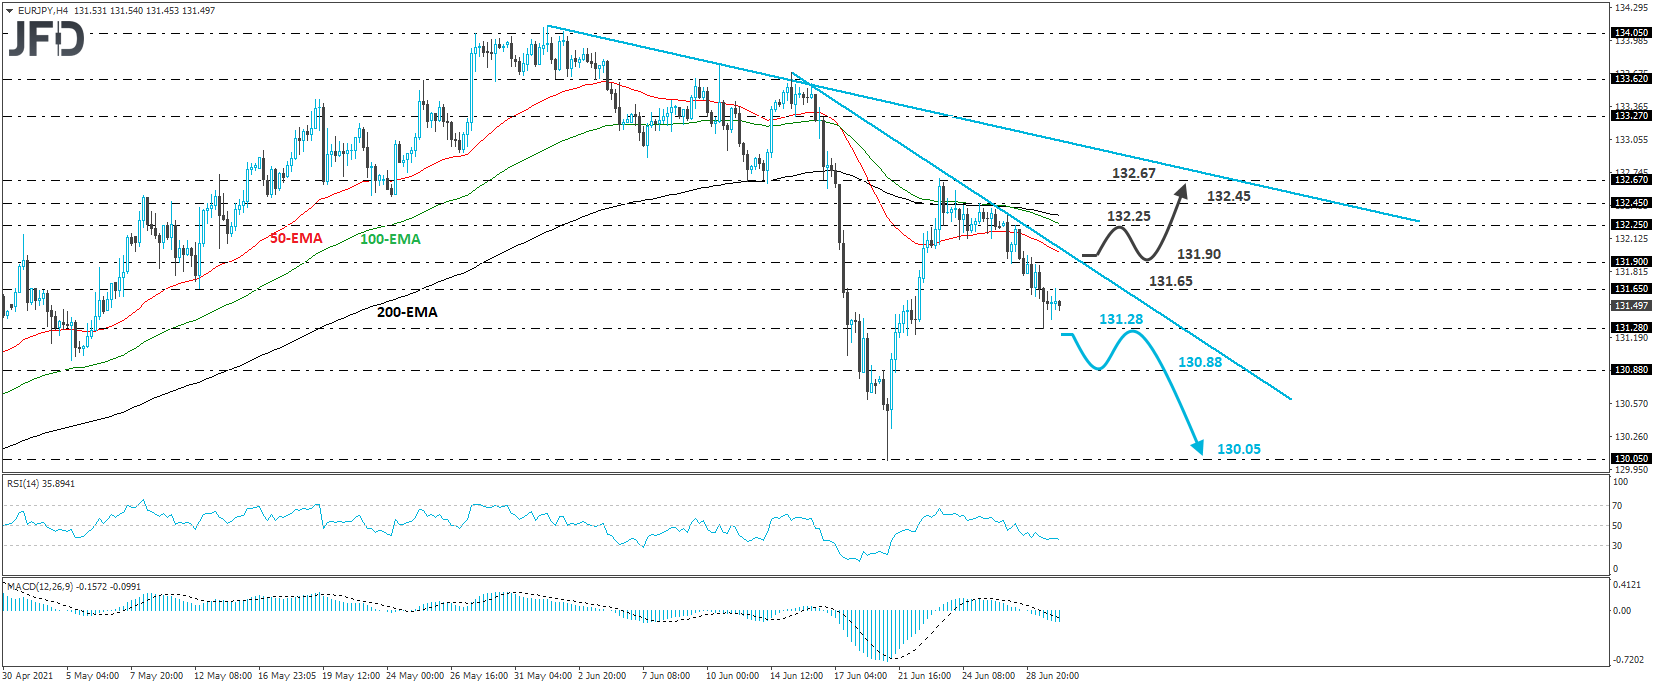 EUR/JPY 4-hour chart technical analysis